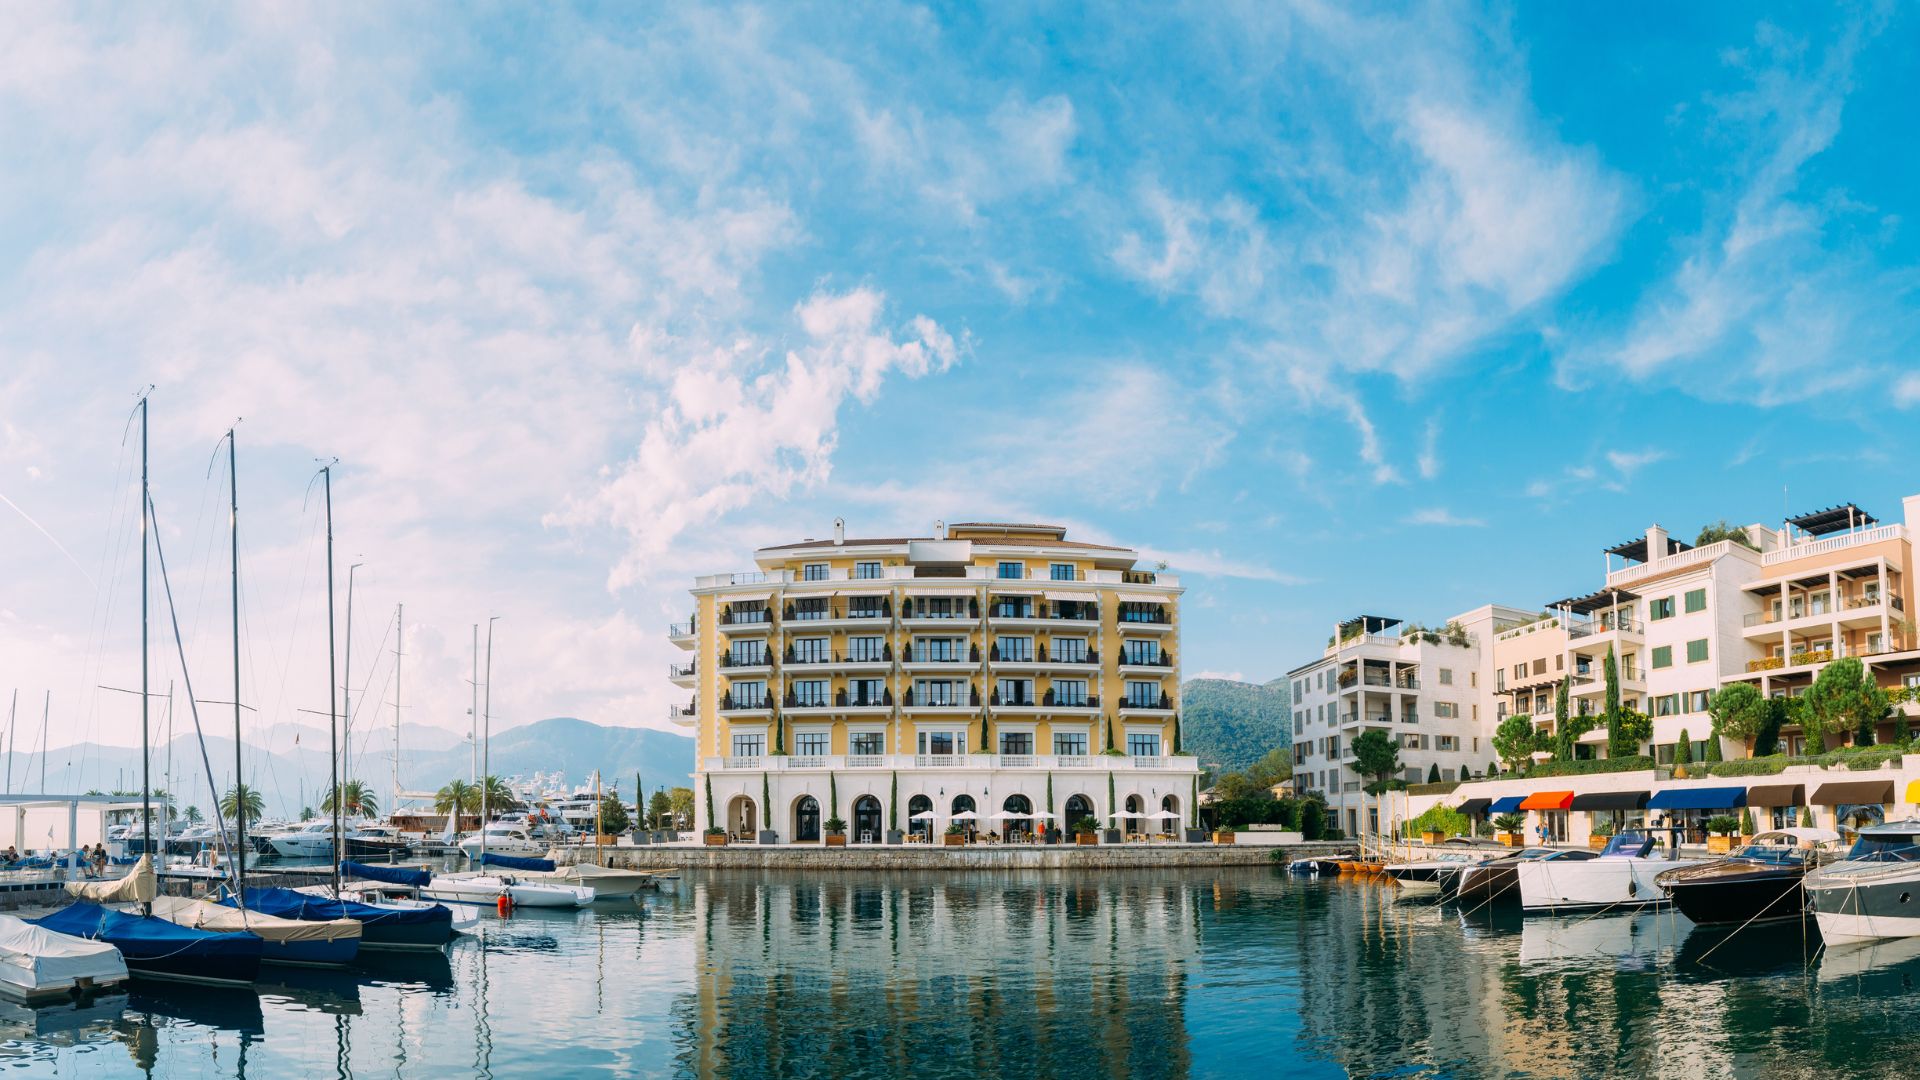 Tivat, a city for the soul | Serbia Visit